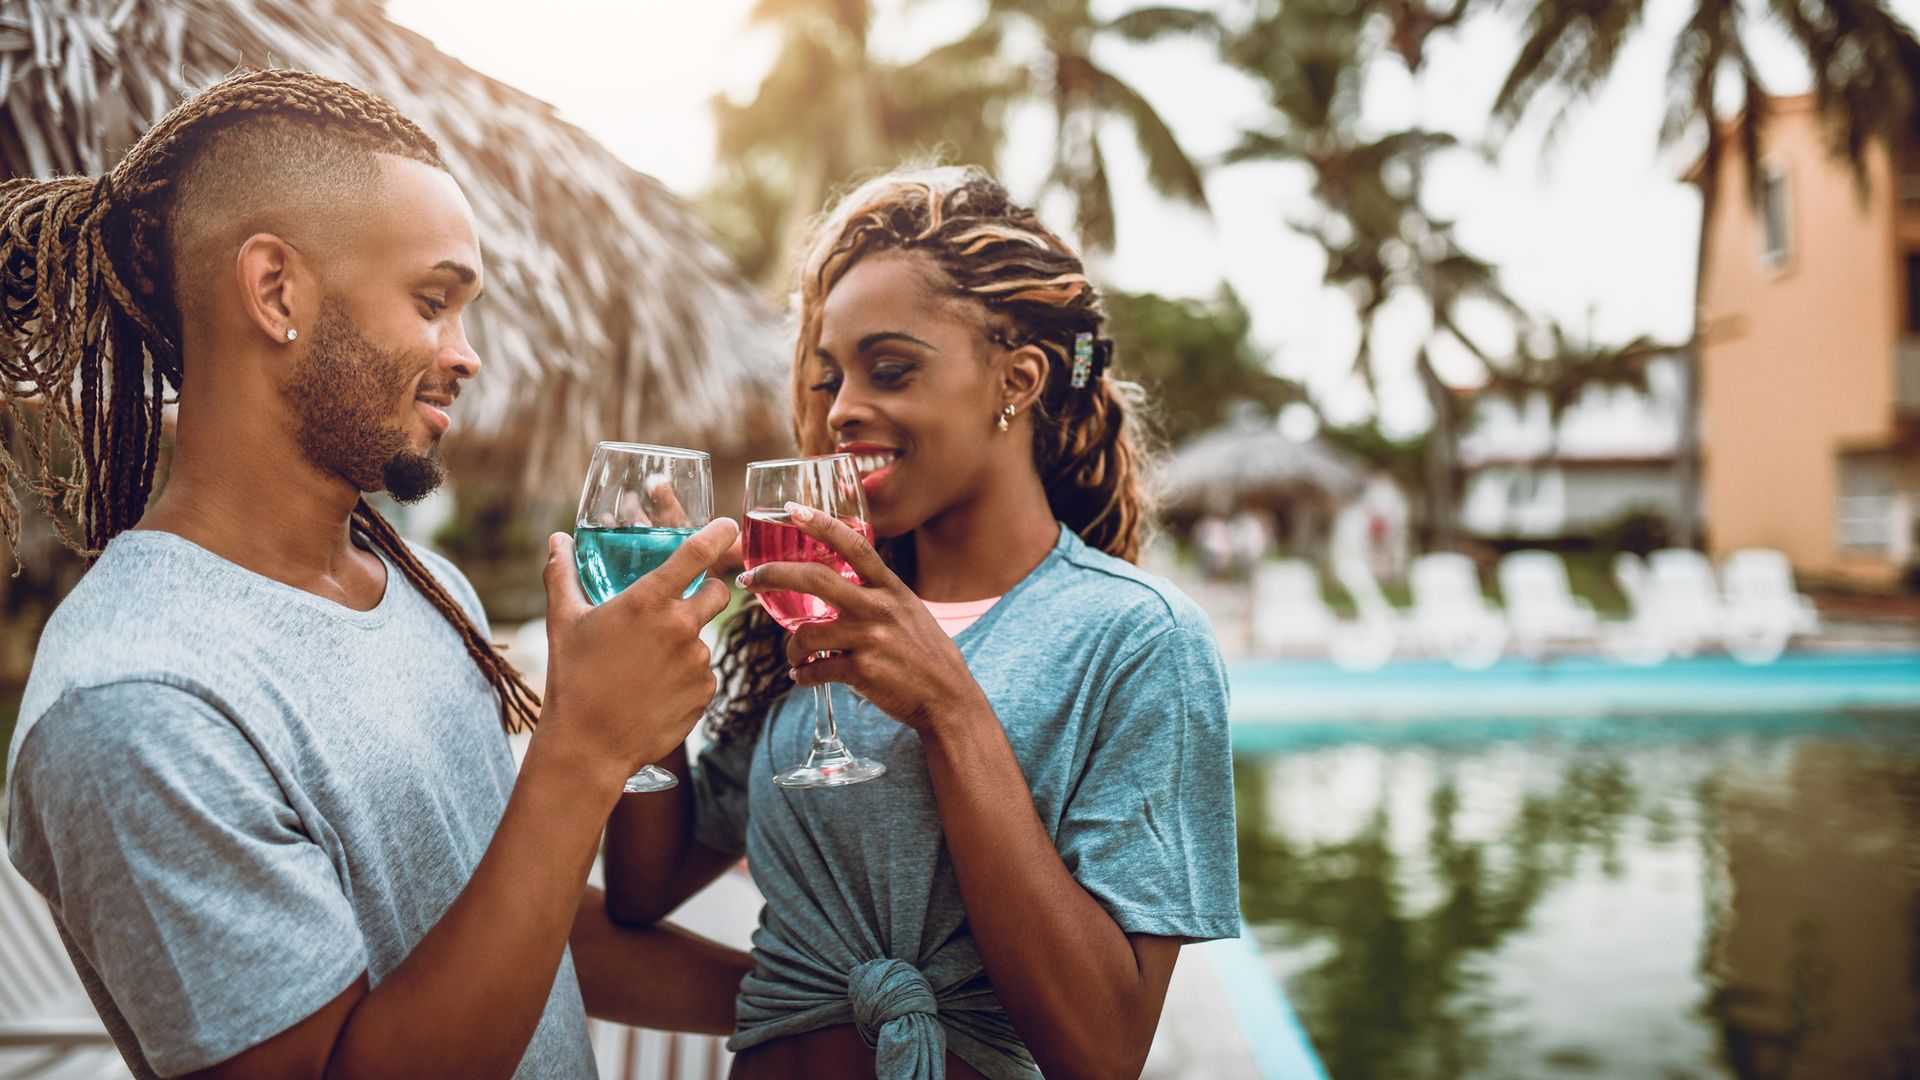 Young Couple Making Cocktails Toast In A Tourist Resort